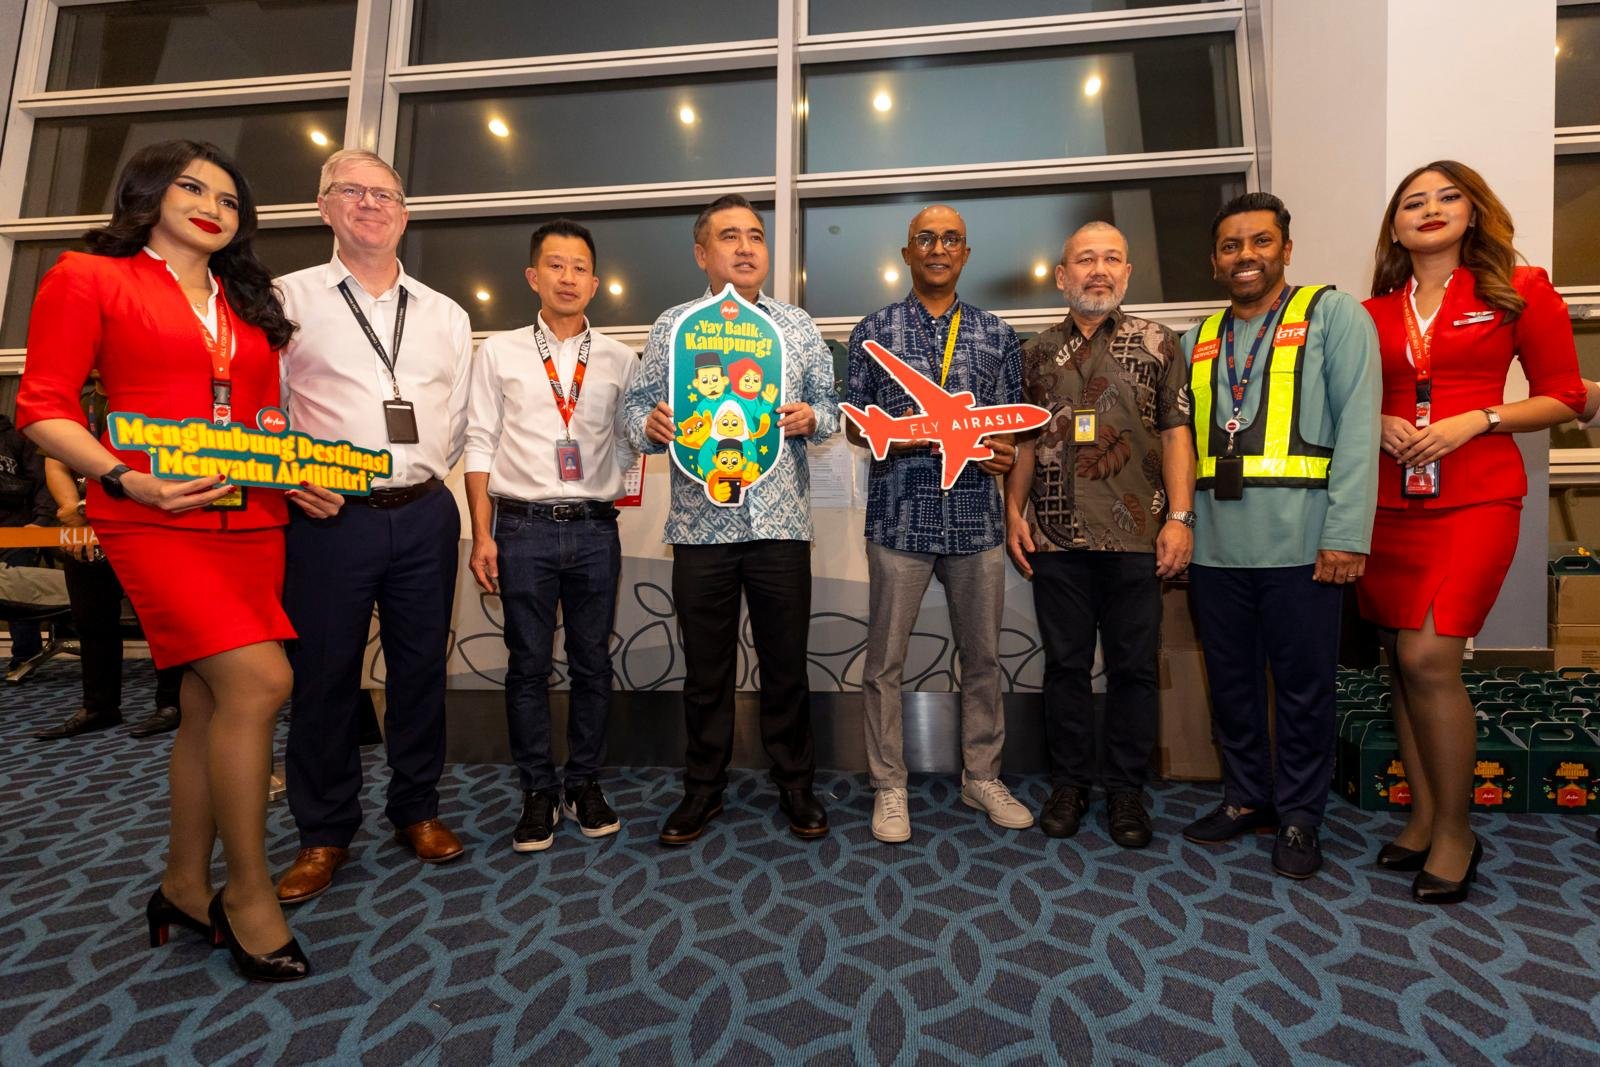  Photo Caption: (Second from left) - Chief Operating Officer, Airport Operations Malaysia, (MAHB), Gordon Stewart; Deputy CEO of AirAsia Aviation Group (Airline Operations), Datuk Captain Chester Voo; Minister of Transport Malaysia, YB Tuan Loke Siew